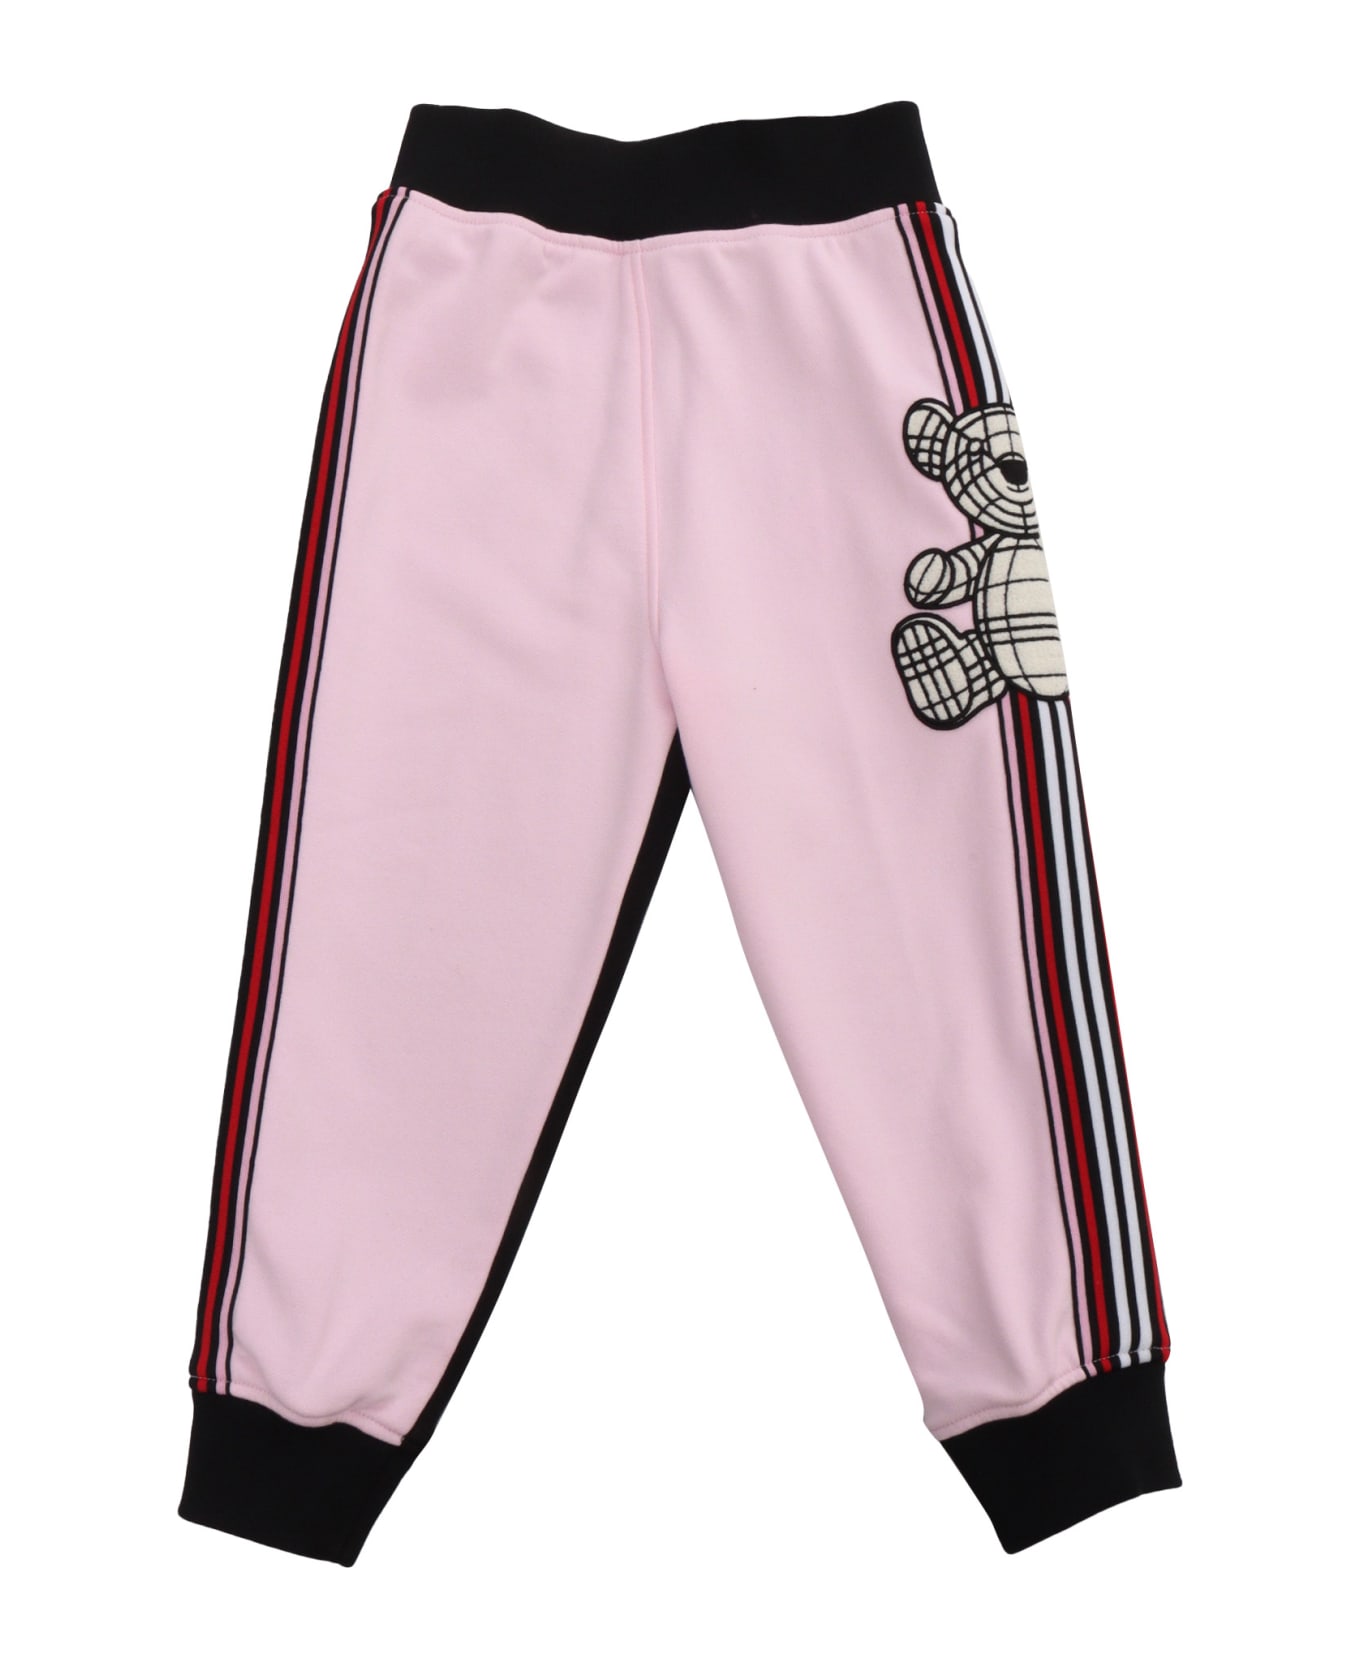 Burberry Pink Burberry Joggers - PINK ボトムス